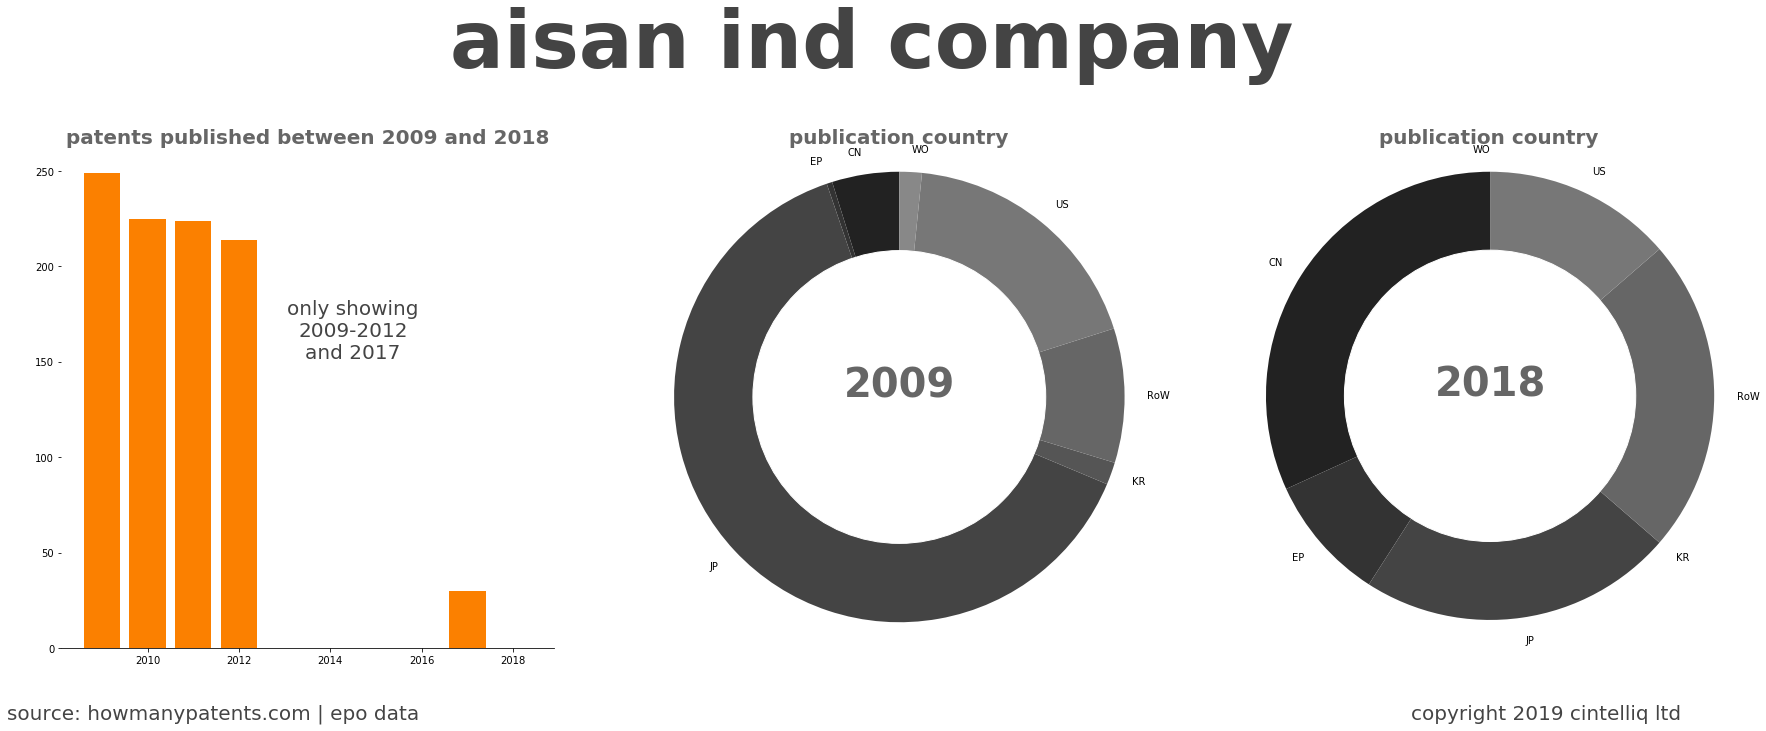 summary of patents for Aisan Ind Company